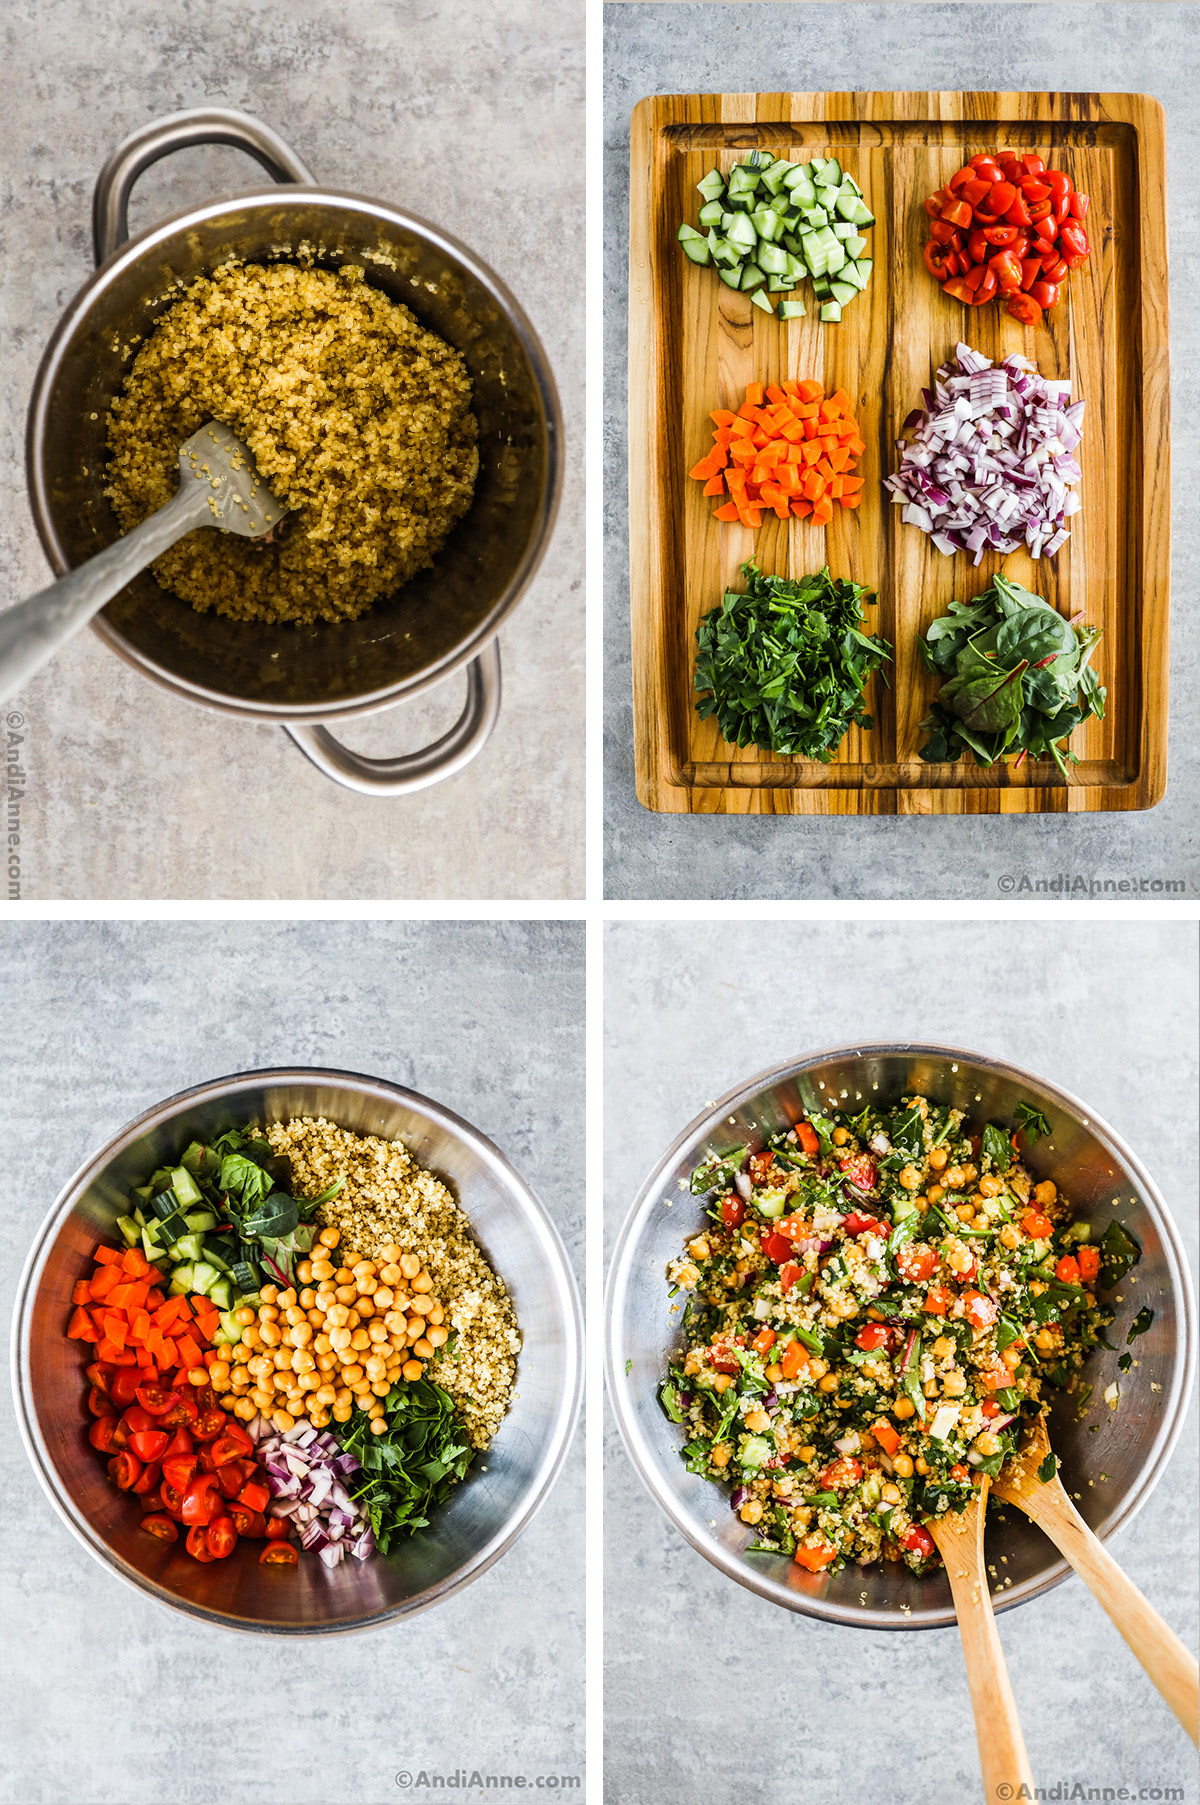 Four images. First is cooked quinoa in a pot with spatula. Second is groups of chopped vegetable on a cutting board. Third is vegetables dumped in a bowl. Fourth is final quinoa salad in steel bowl with wood serving spoons.